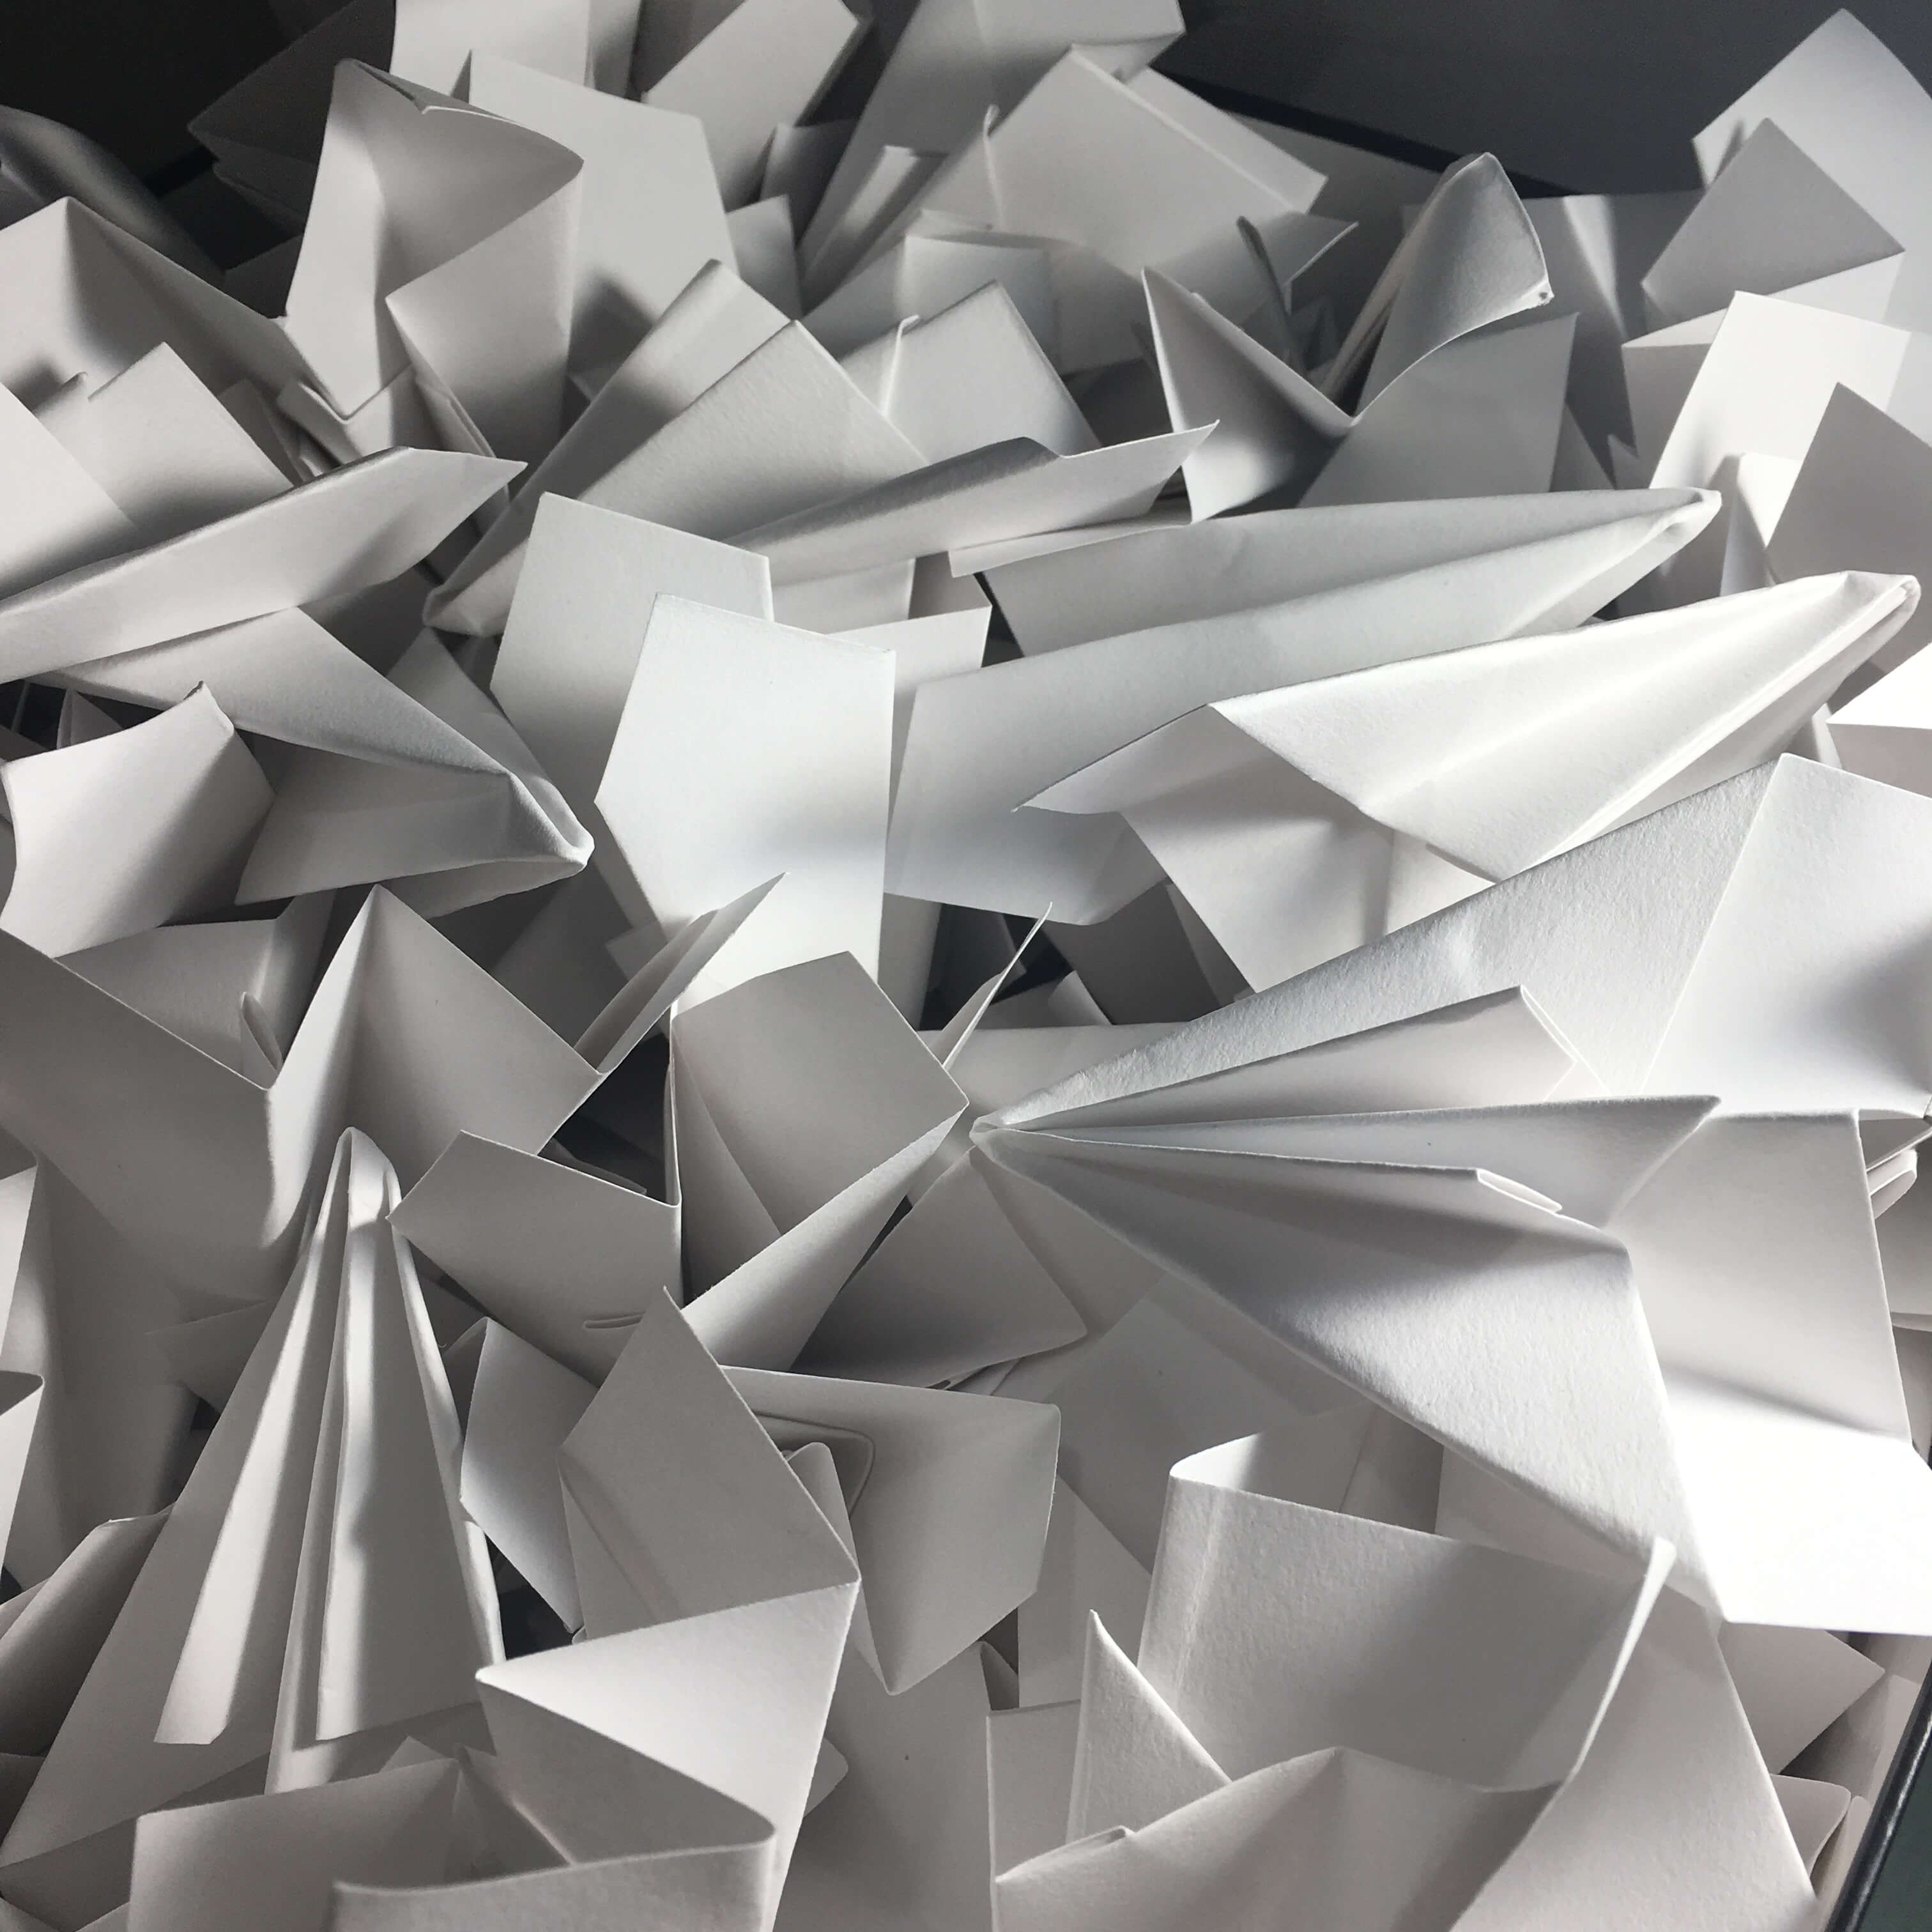 A heap of paper planes made from white paper bunched together.